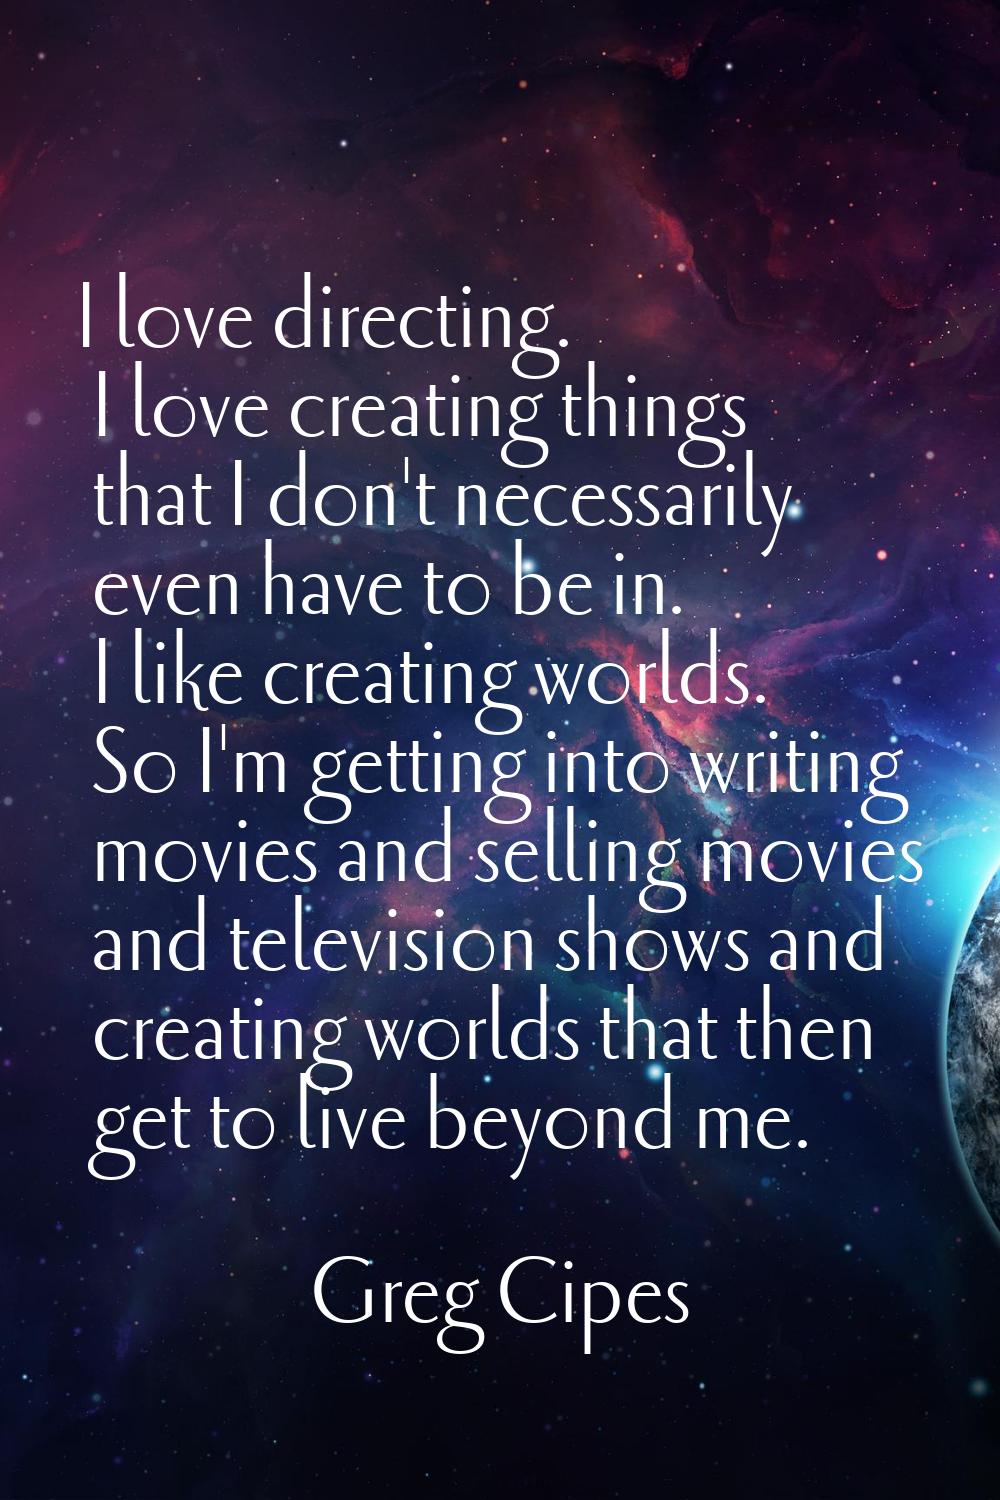 I love directing. I love creating things that I don't necessarily even have to be in. I like creati